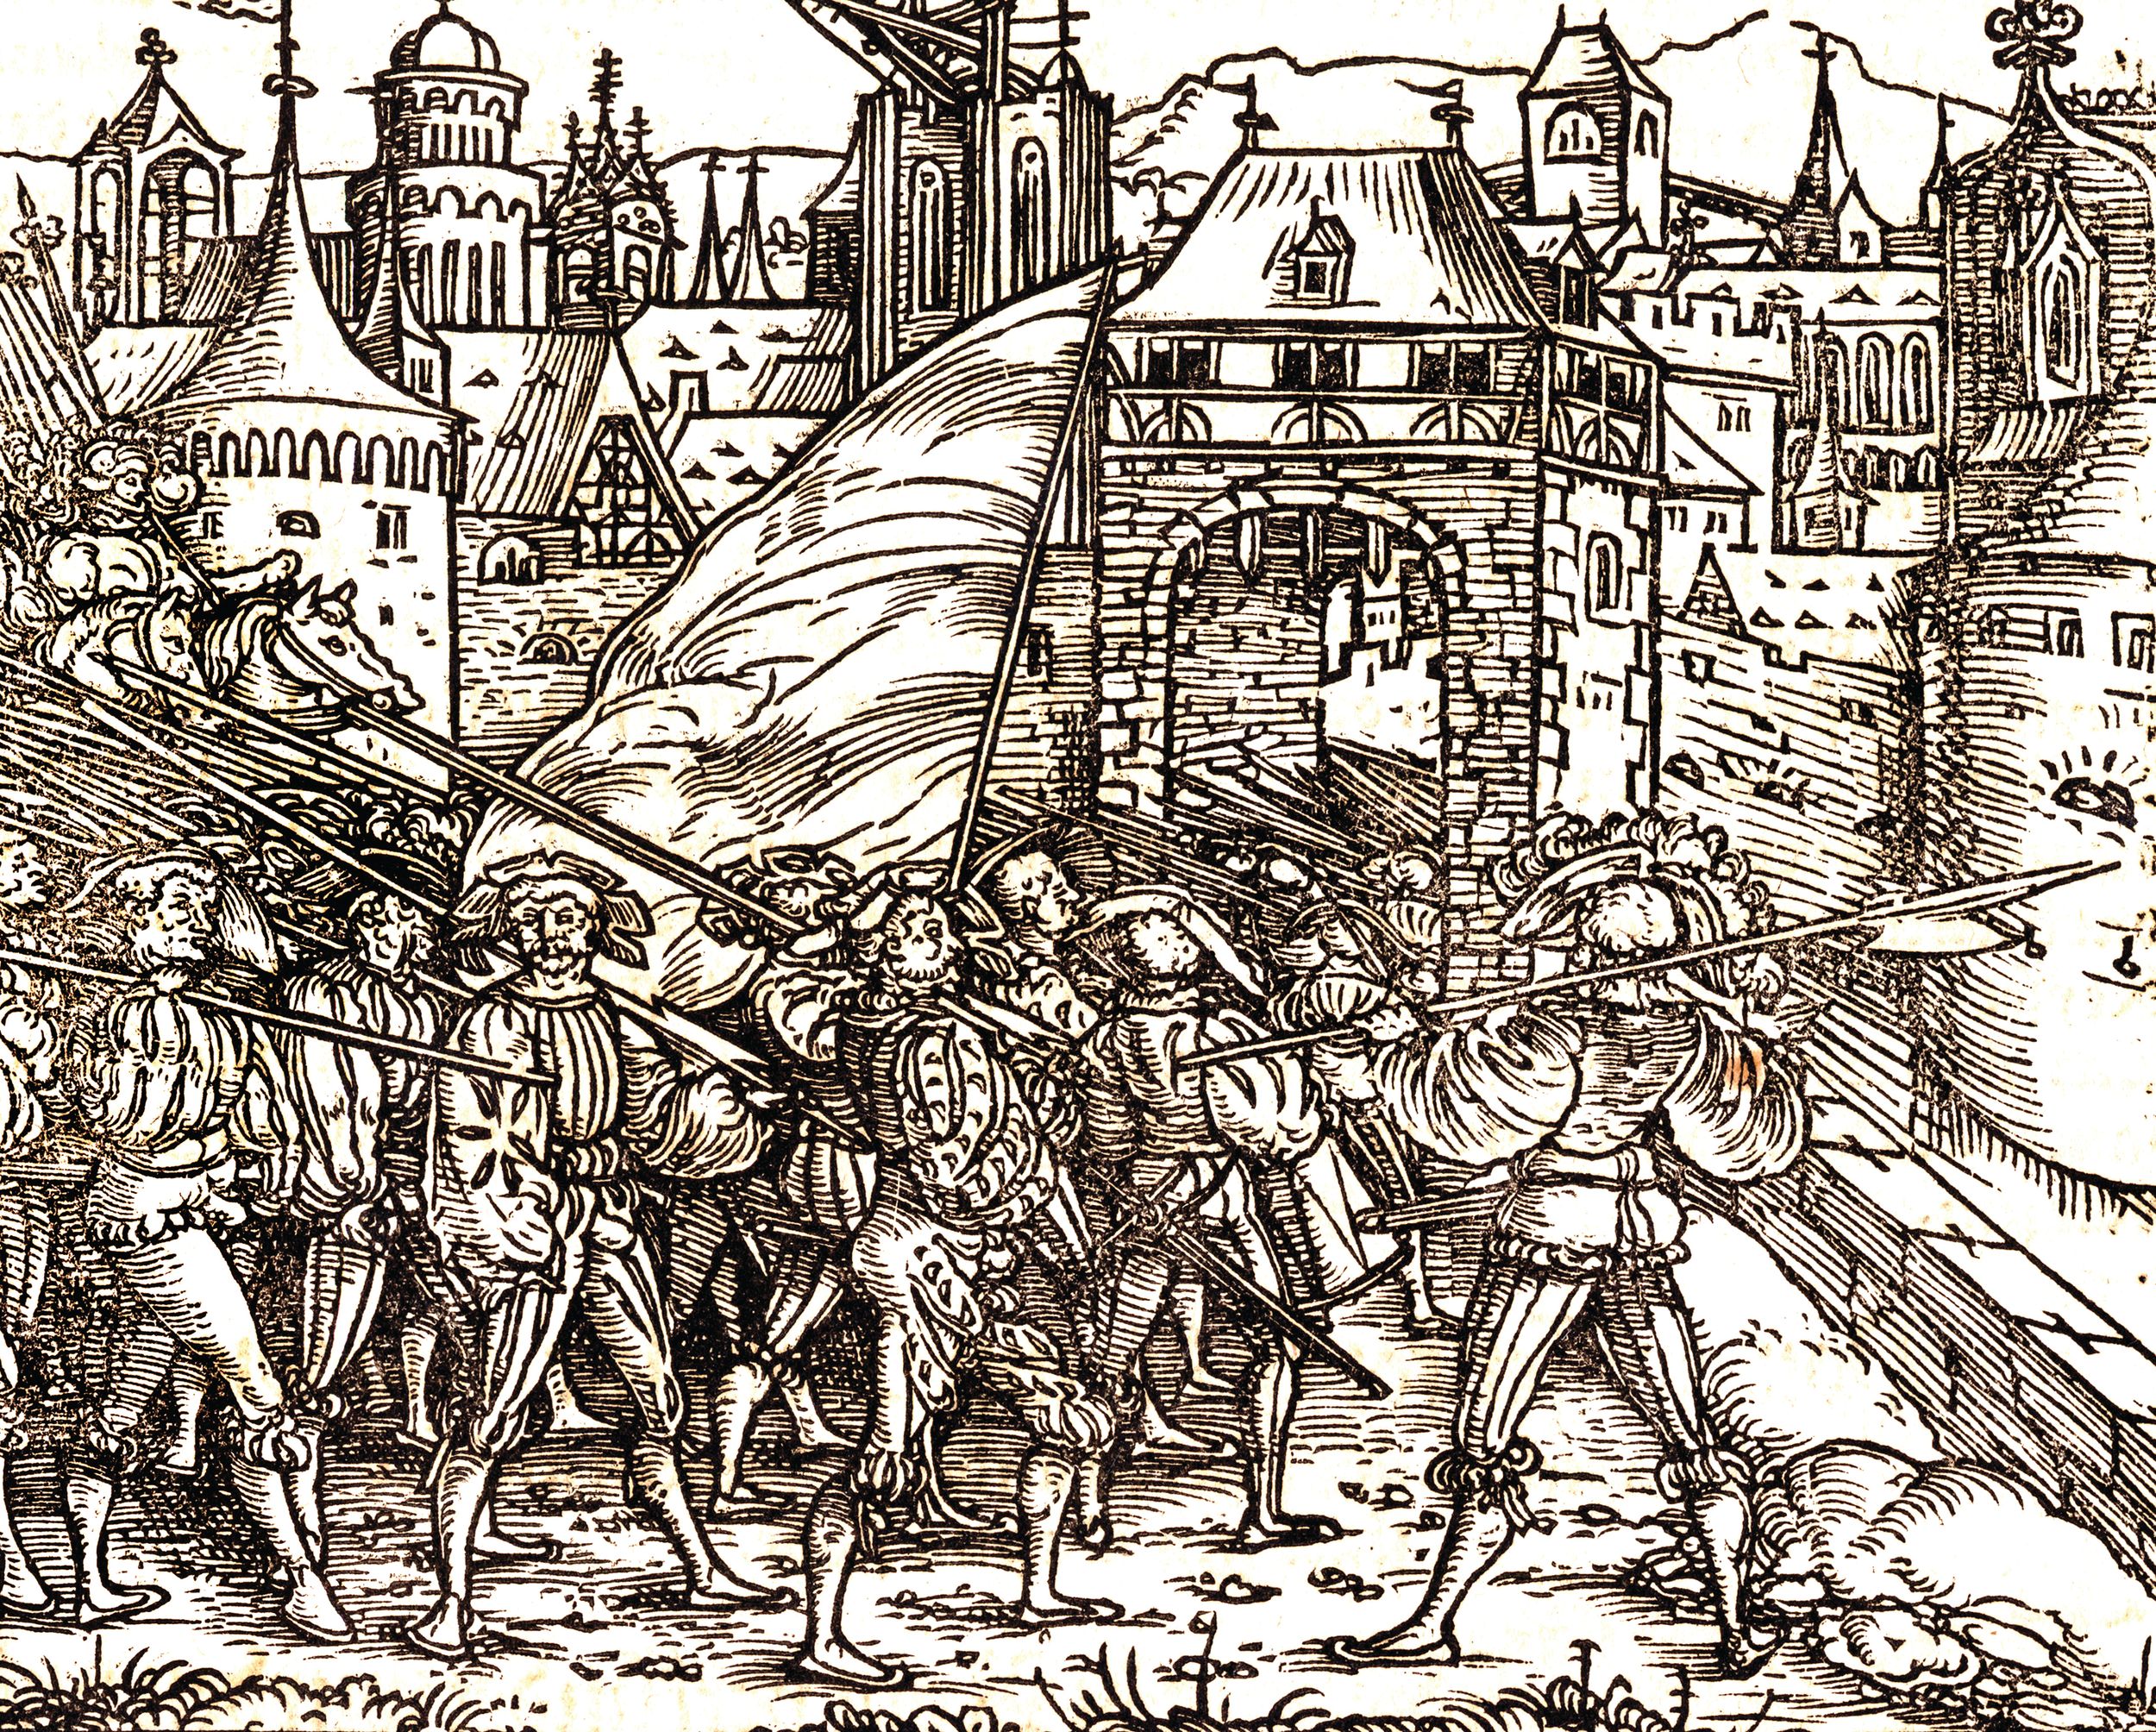 This woodcut from 1492 shows Swiss mercenaries entering a town. While negotiating the surrender of the Milanese town of Pontremoli, the Swiss accompaning Charles VIII army plundered the town, murdered all the men, and then burned it to the ground, destroying provisions needed by the French. 